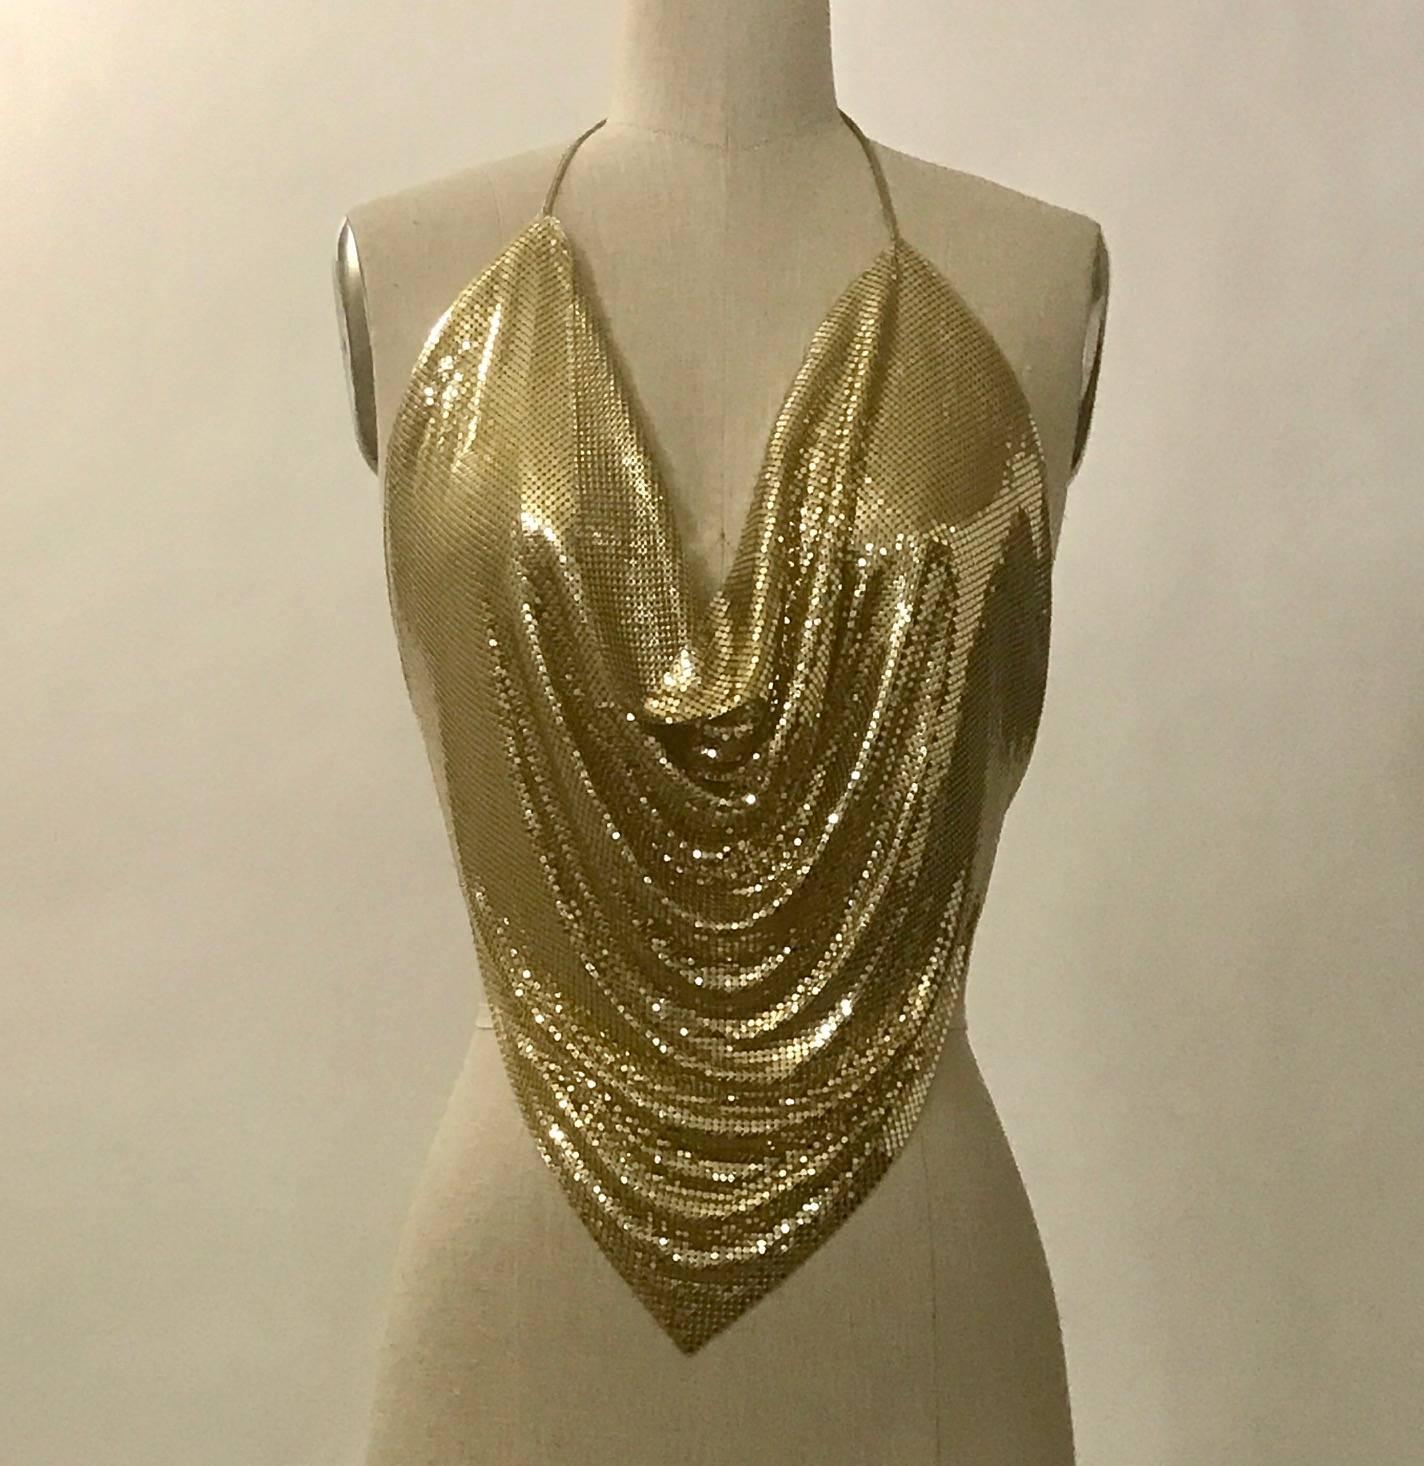 Vintage 1970s gold metal mesh halter top with gold leather string ties at neck and back. 

No label, possibly Stephen Burrows or Whiting and Davis.

One size. Shown on a size 2 dress form. 

Very good condition, would be excellent except for some of